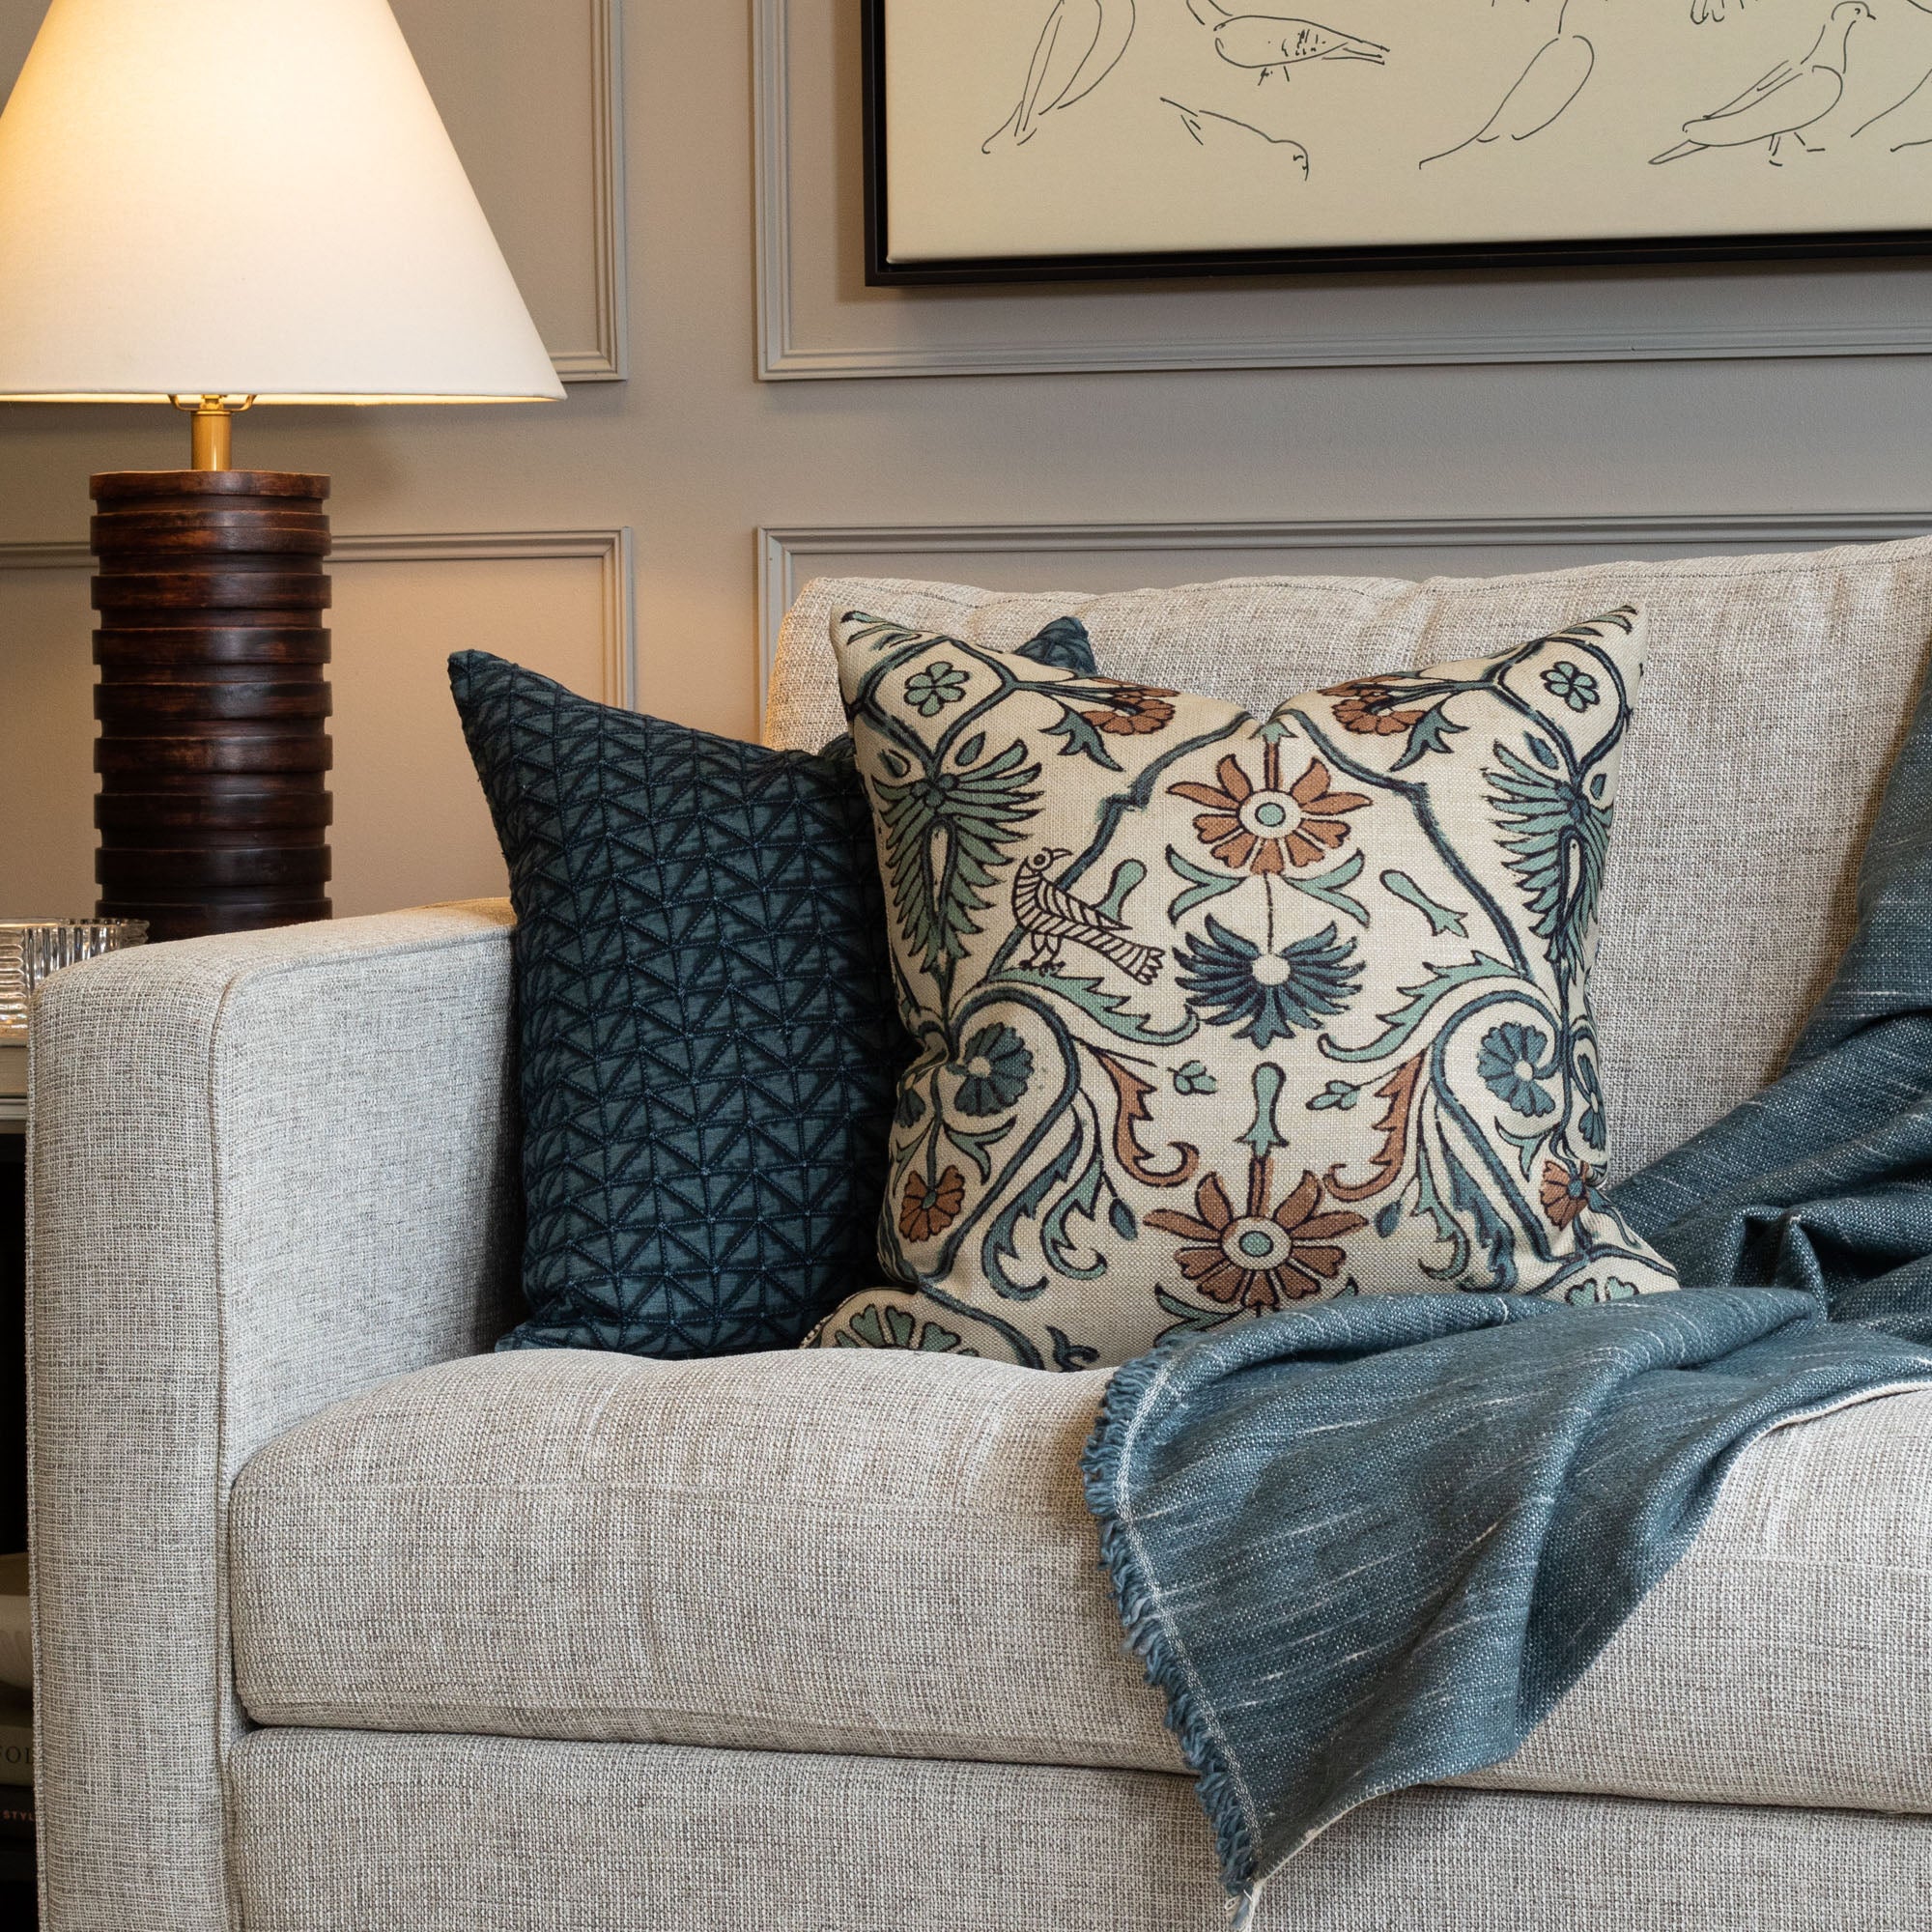 Earthy blue, brown and tan designer decorative pillows from Tonic living 